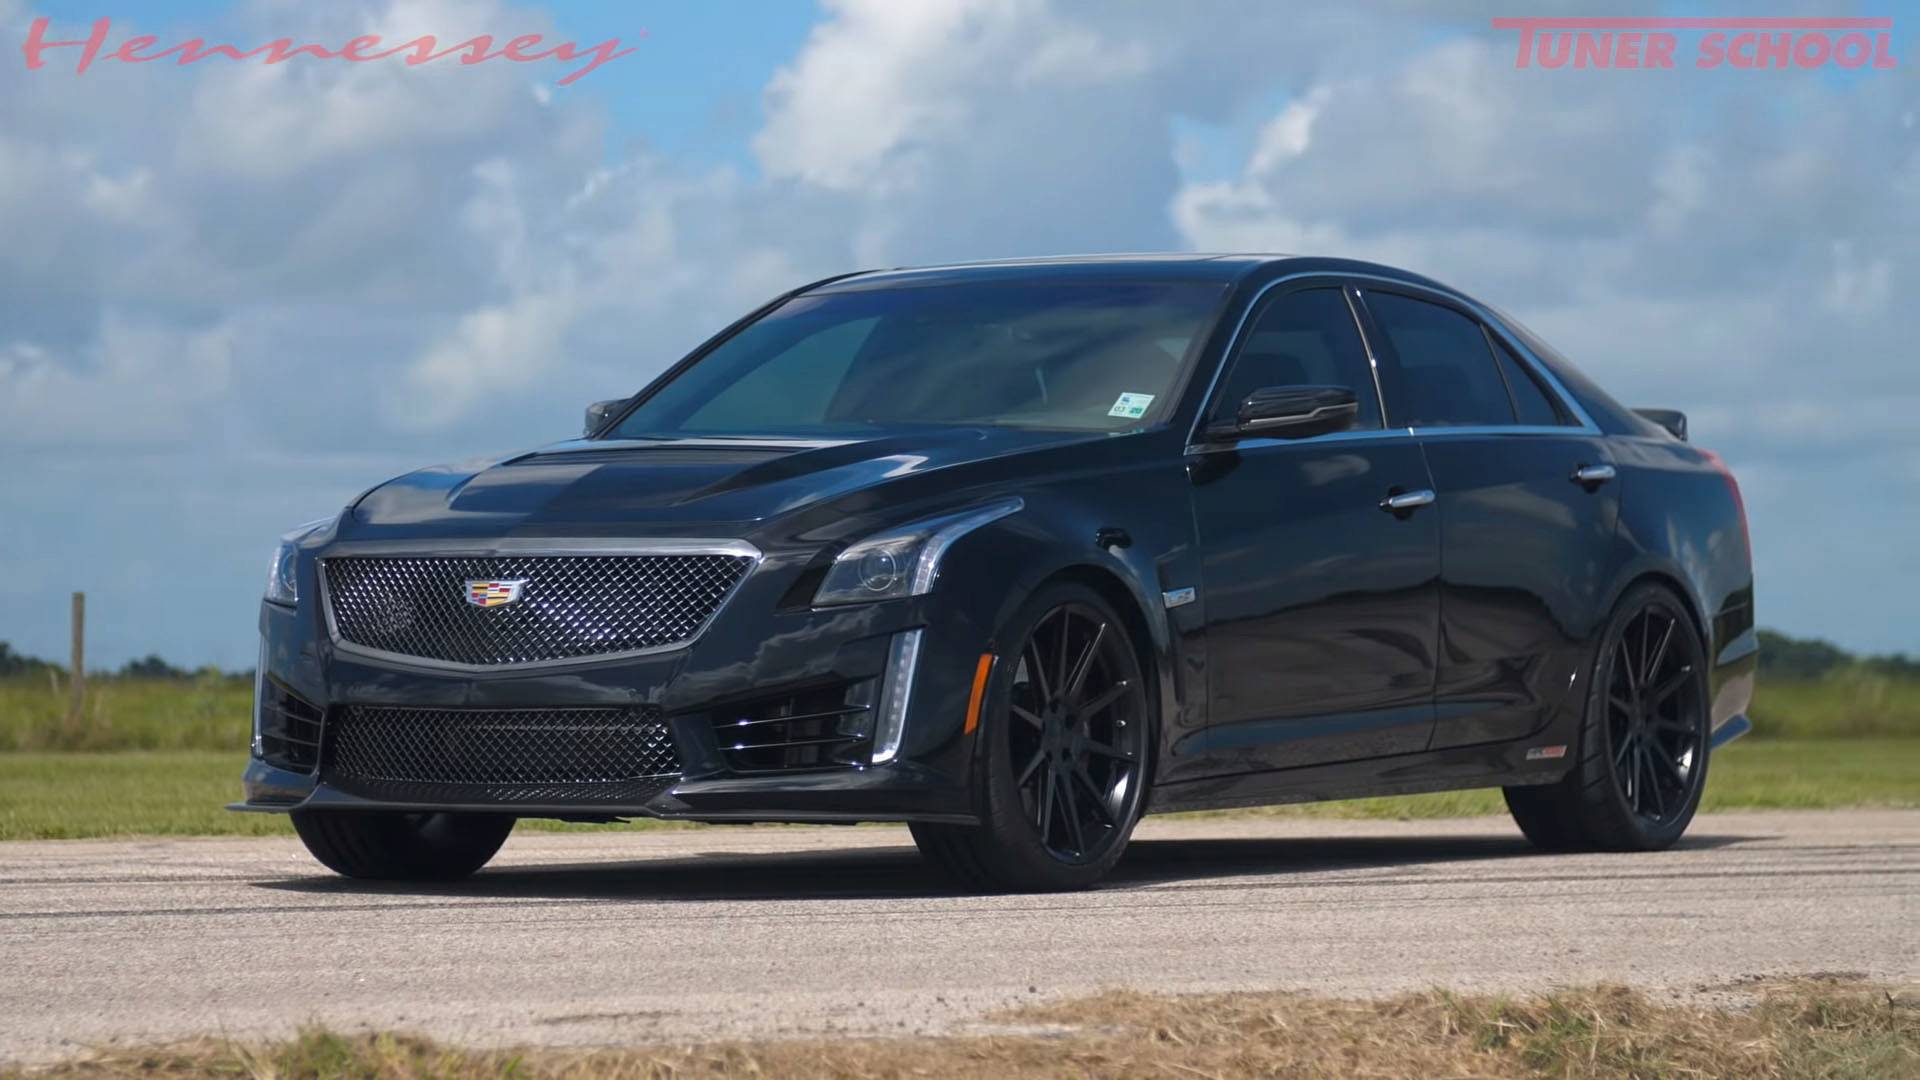 Hennessy Cadillac Logo - Watch Hennessey's Mental 1,000-HP Cadillac CTS-V In Action